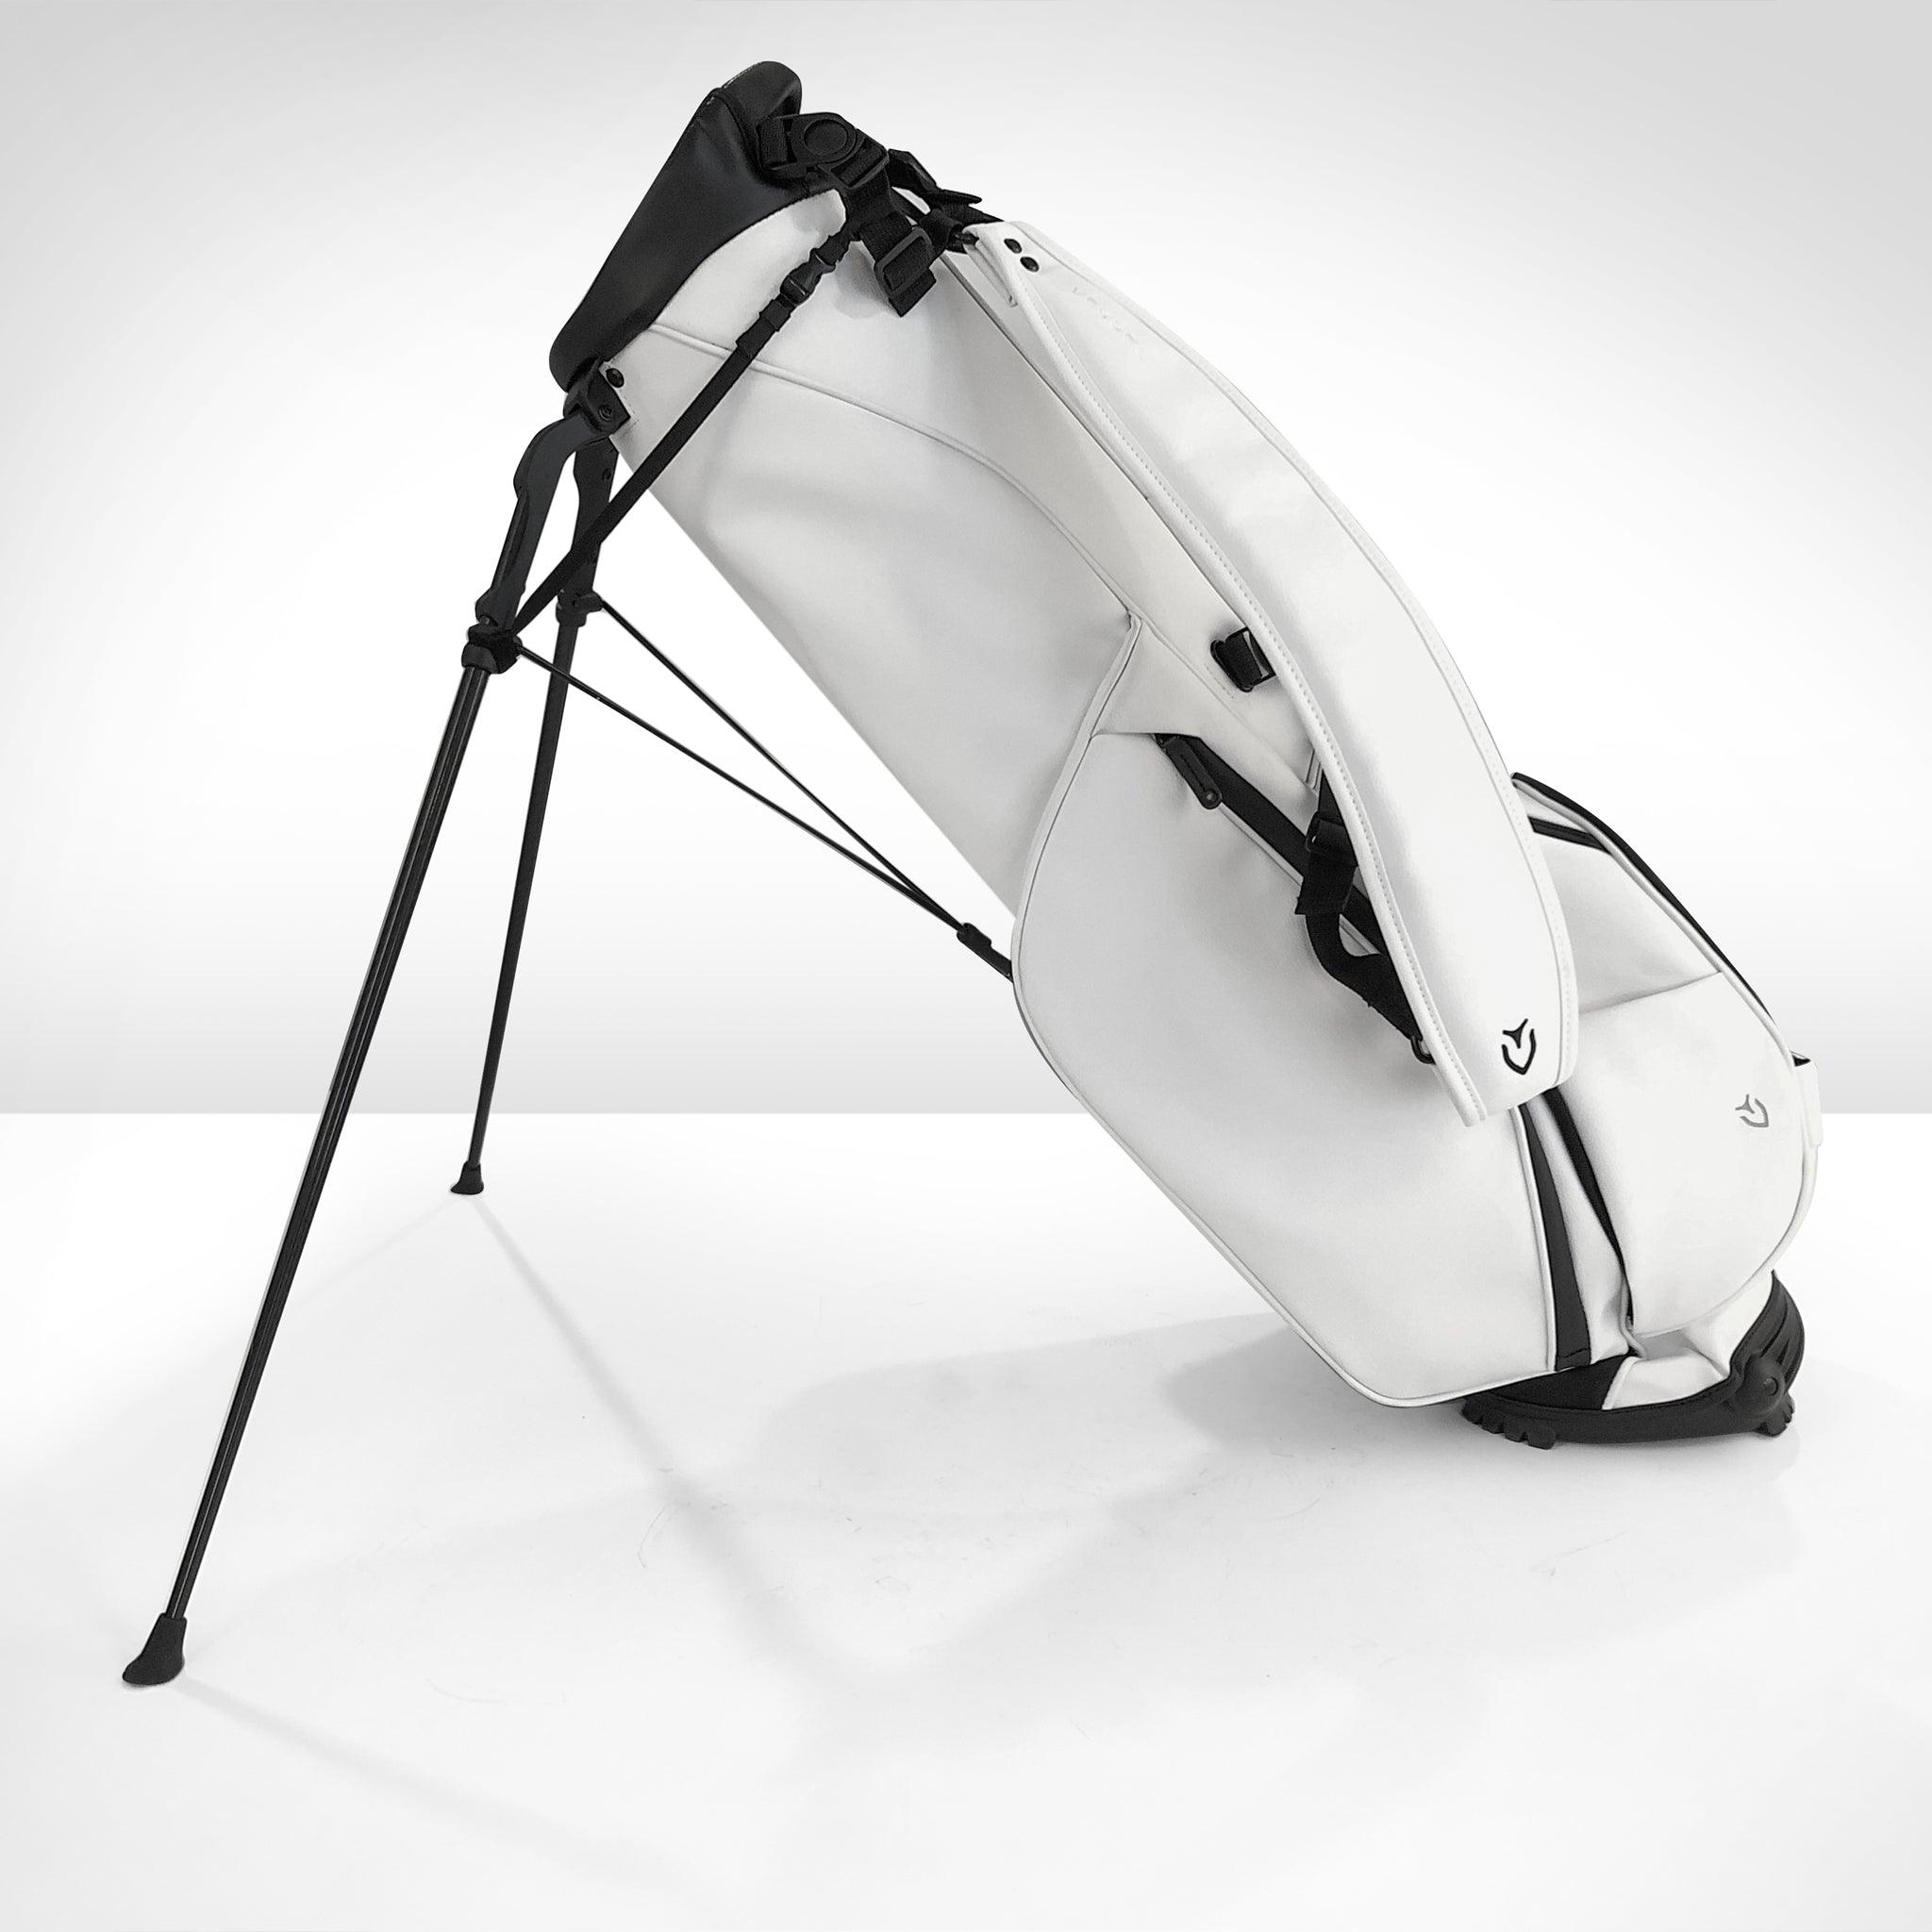 Vessel stand bag with leg tether strap